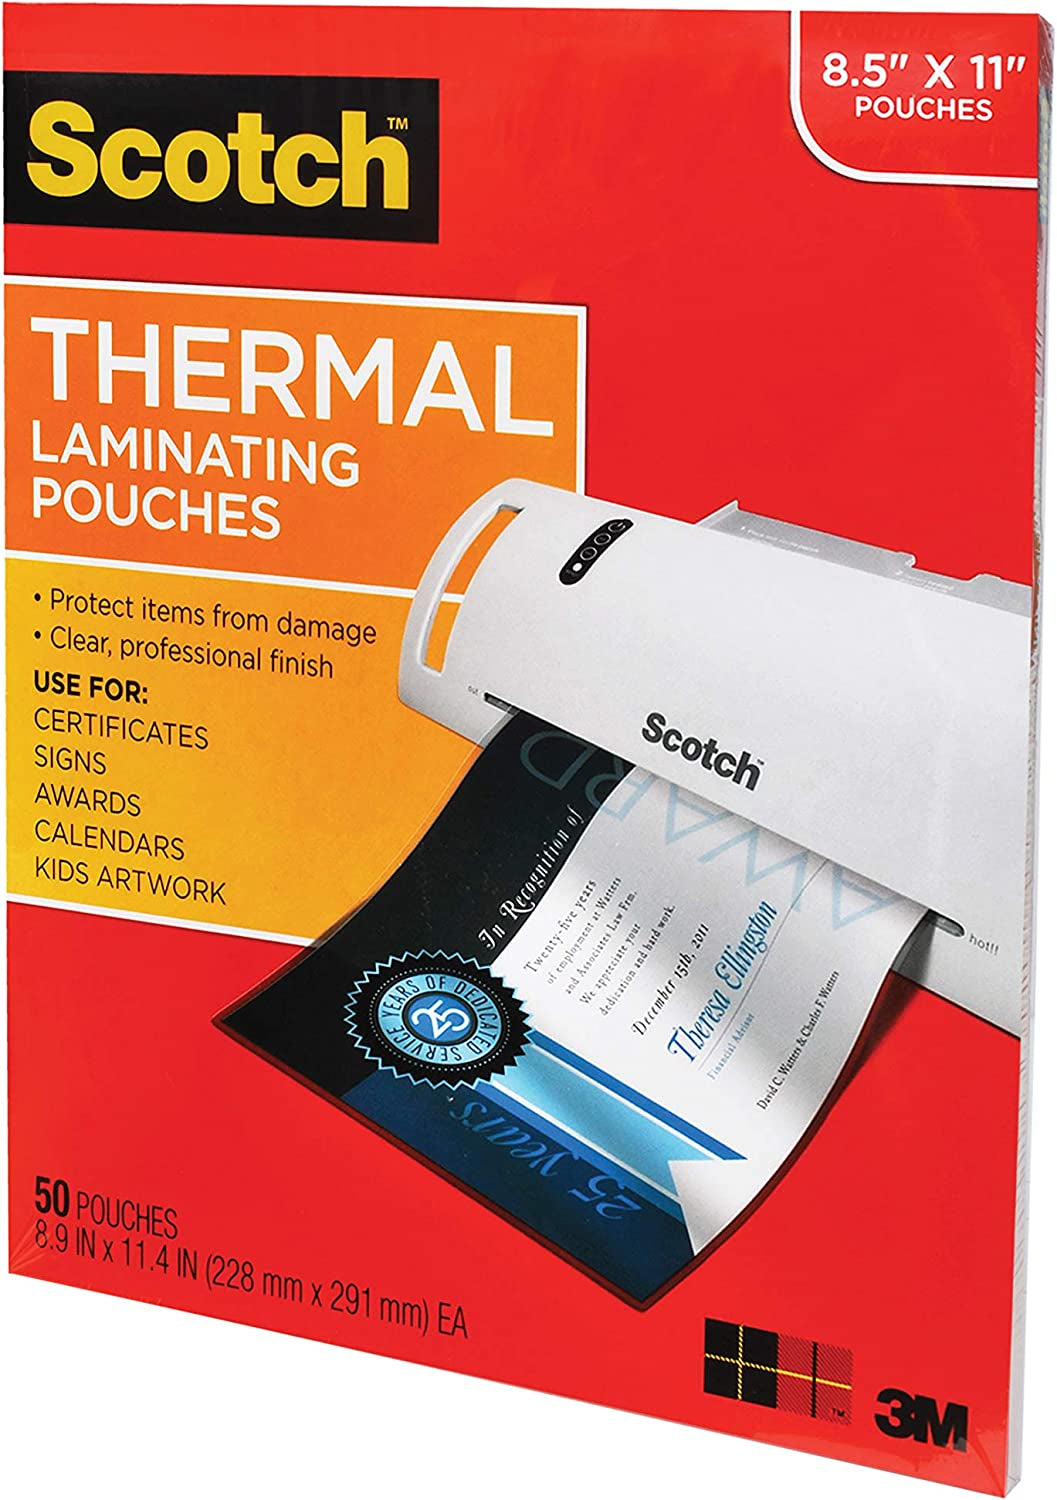 Thermal Laminating Pouches, 50 Pack Laminating Sheets, 3 Mil, 8.9 X 11.4 Inches, Education Supplies & Craft Supplies, for Use with Thermal Laminators, Letter Size Sheets (TP3854-50)